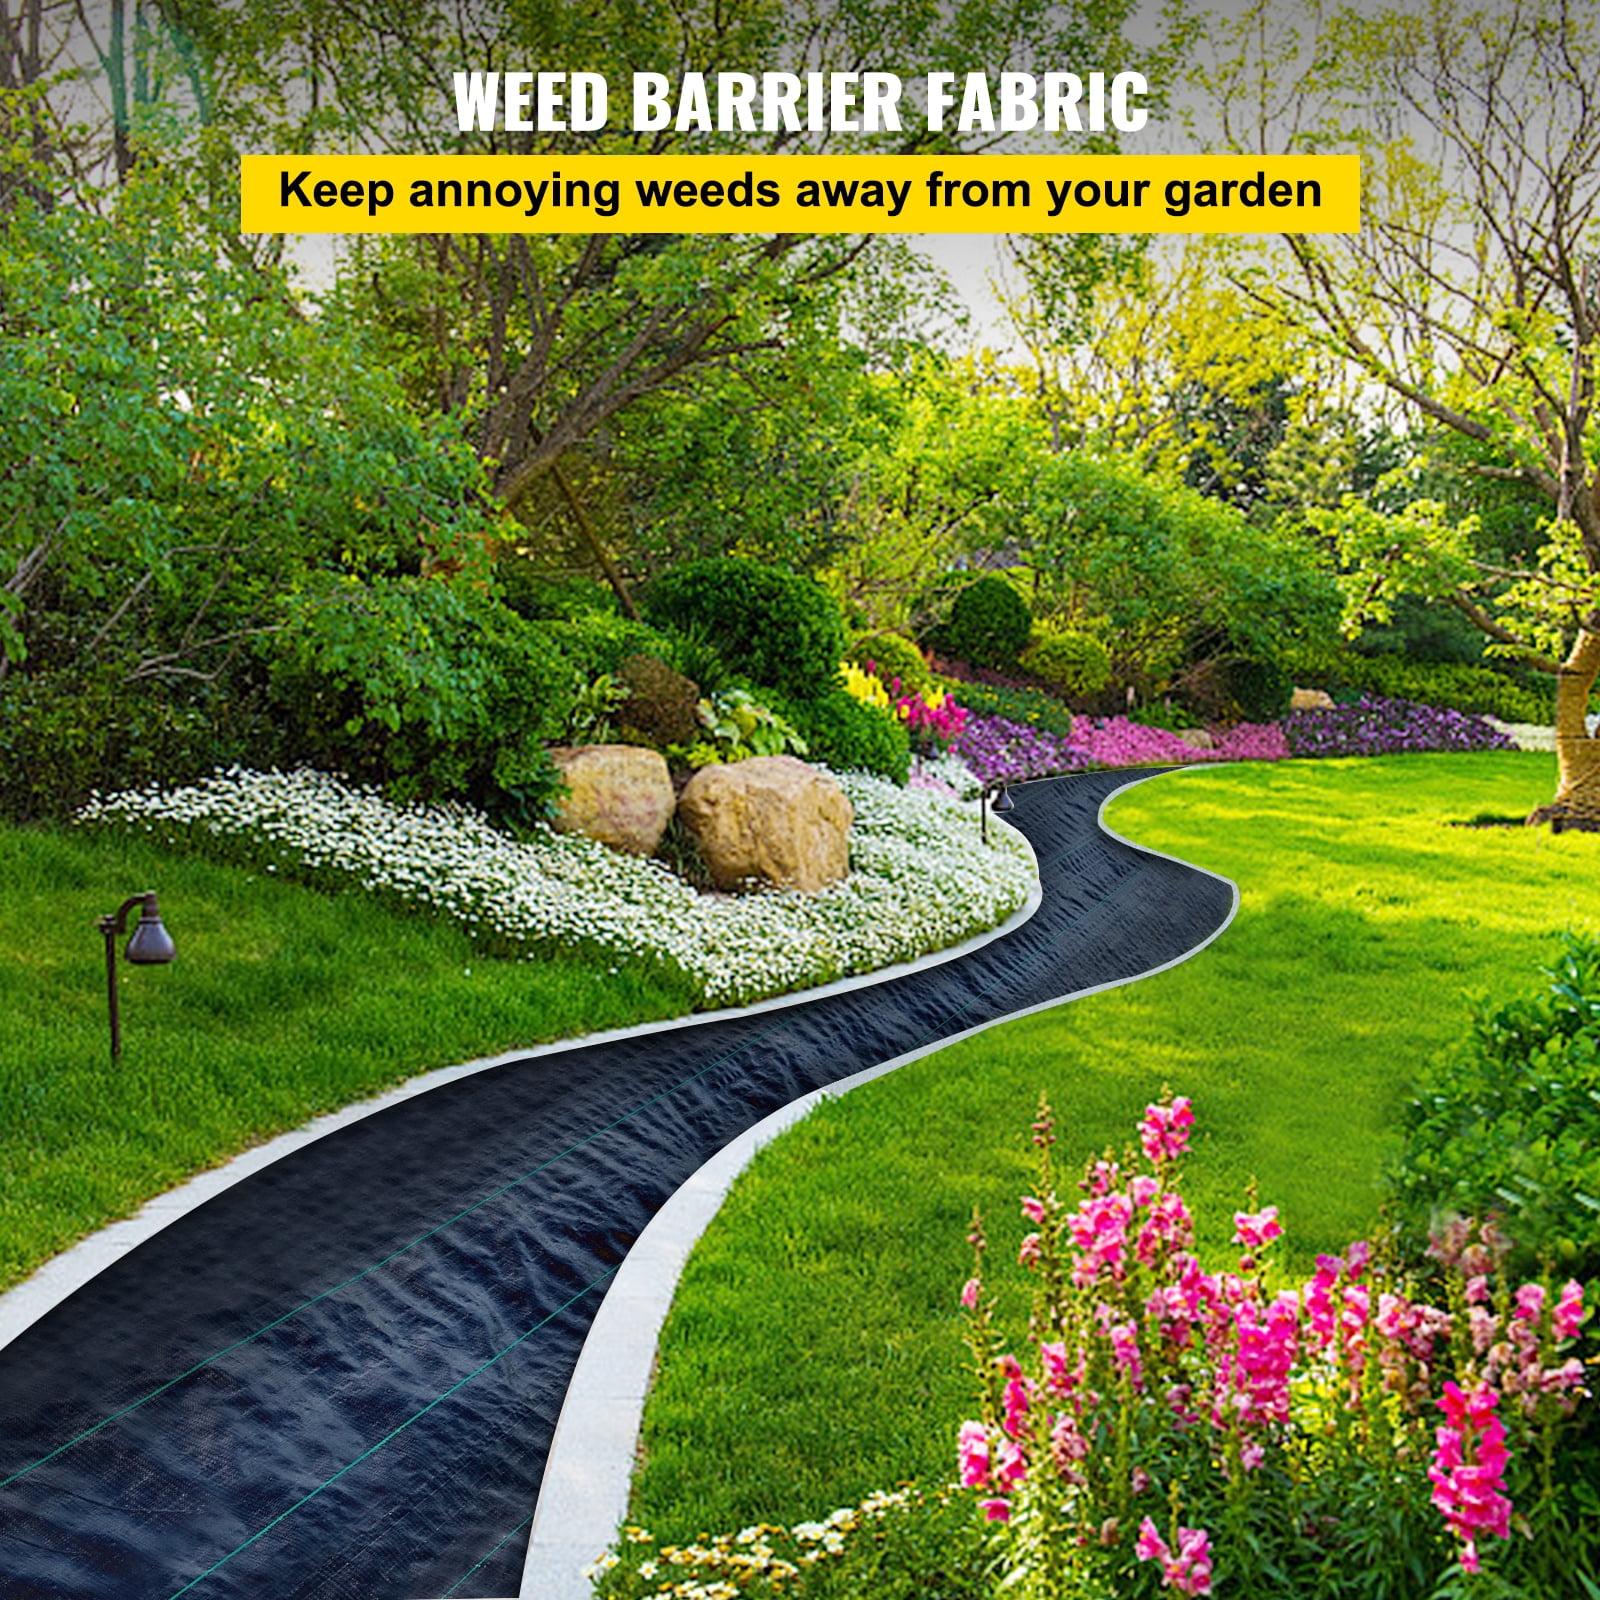 Flower Bed Garden Fabric Roll Premium Landscape Fabric Heavy Duty 4 x 50 ft 4.1oz/140gsm Black Weedblock for Garden Driveway Woven Weed Barrier Landscape Fabric Drainage and Weed Prevention 